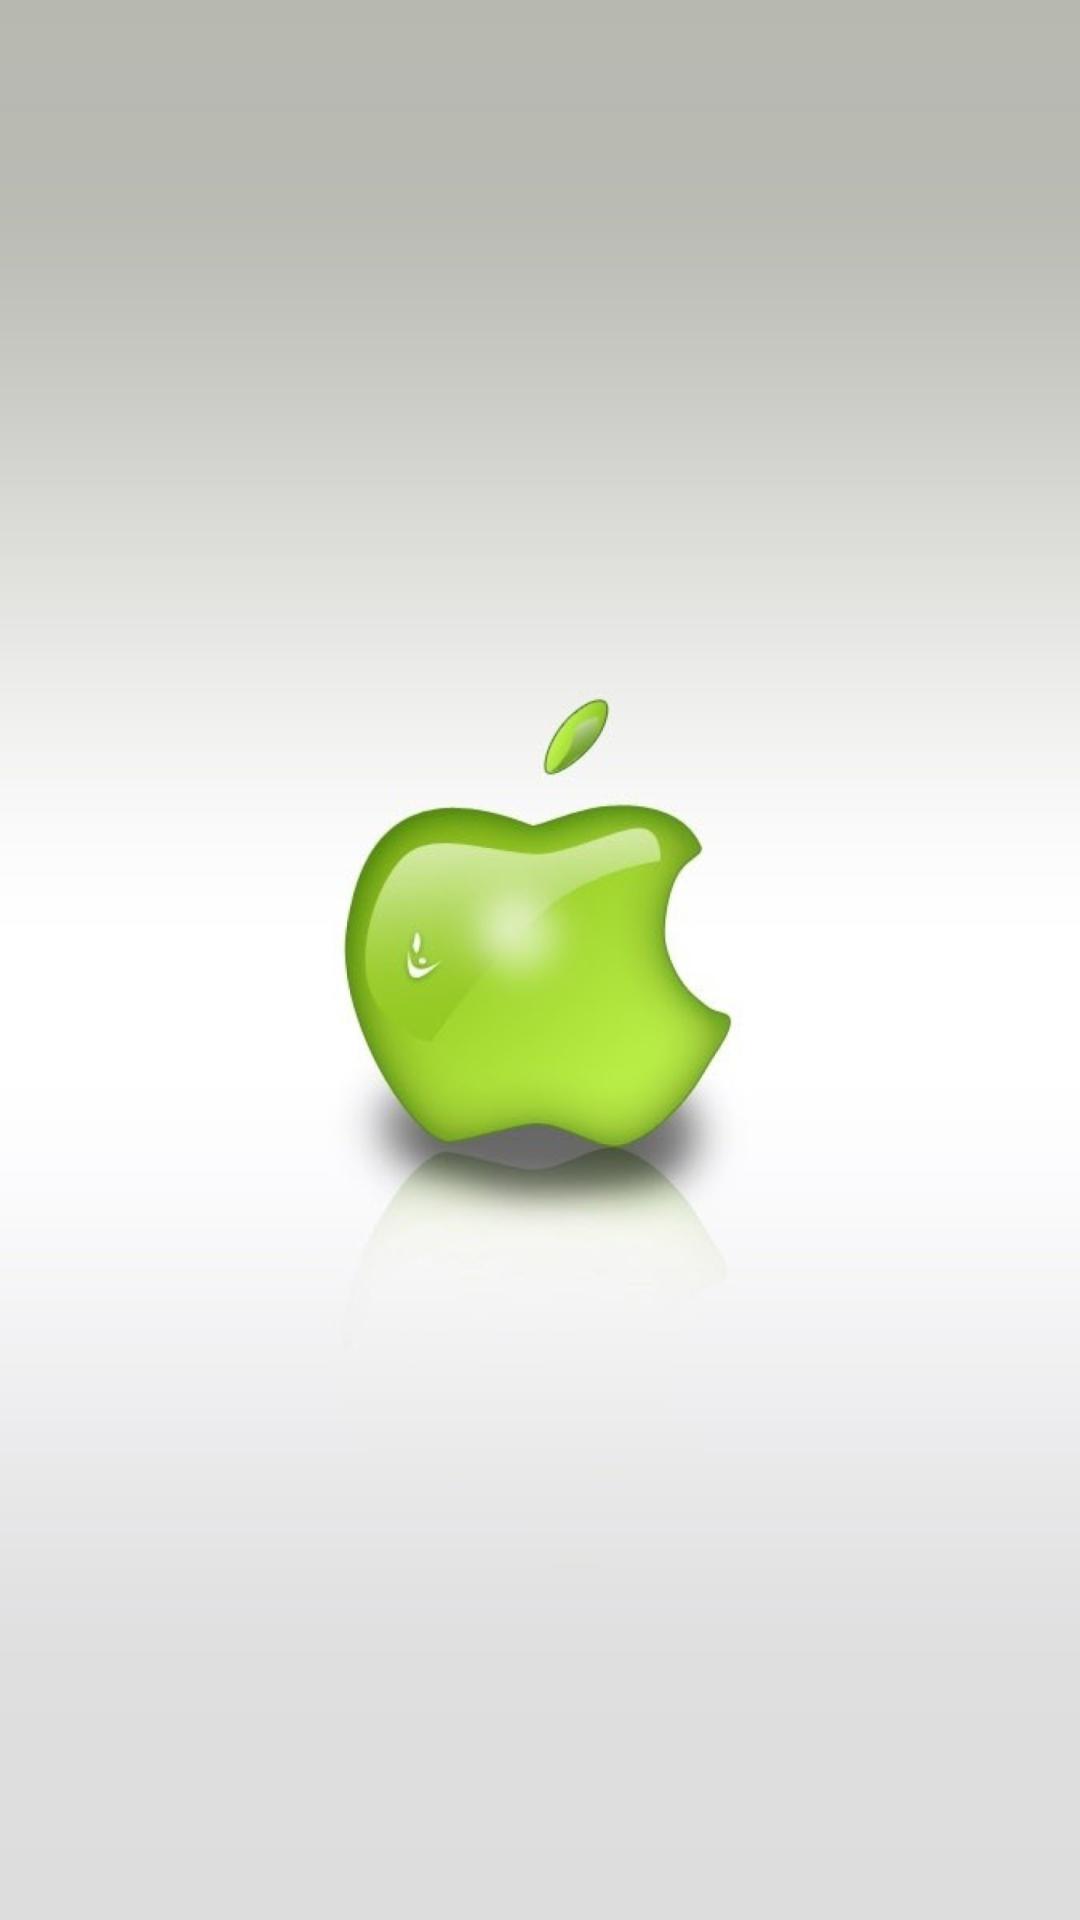 Download Free Green Apple Logo Wallpaper For iPhone